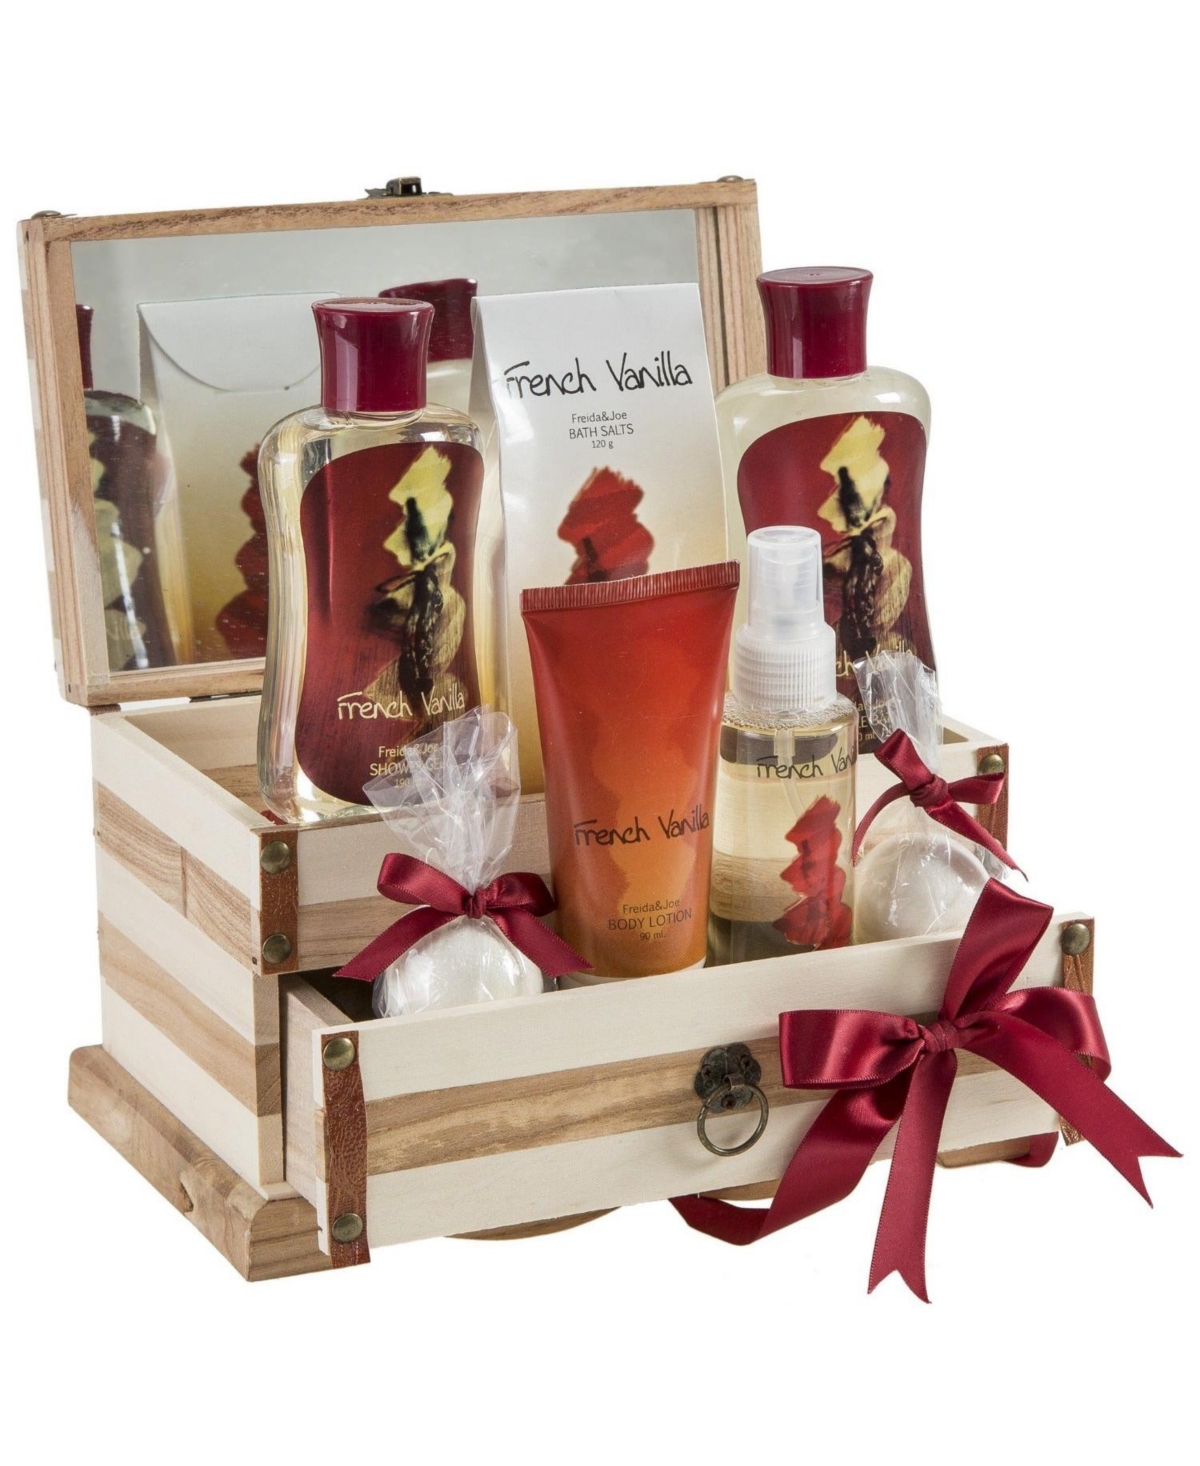 French Vanilla Fragrance Spa & Skin Care Set in a Wooden Jewelry Box - Red